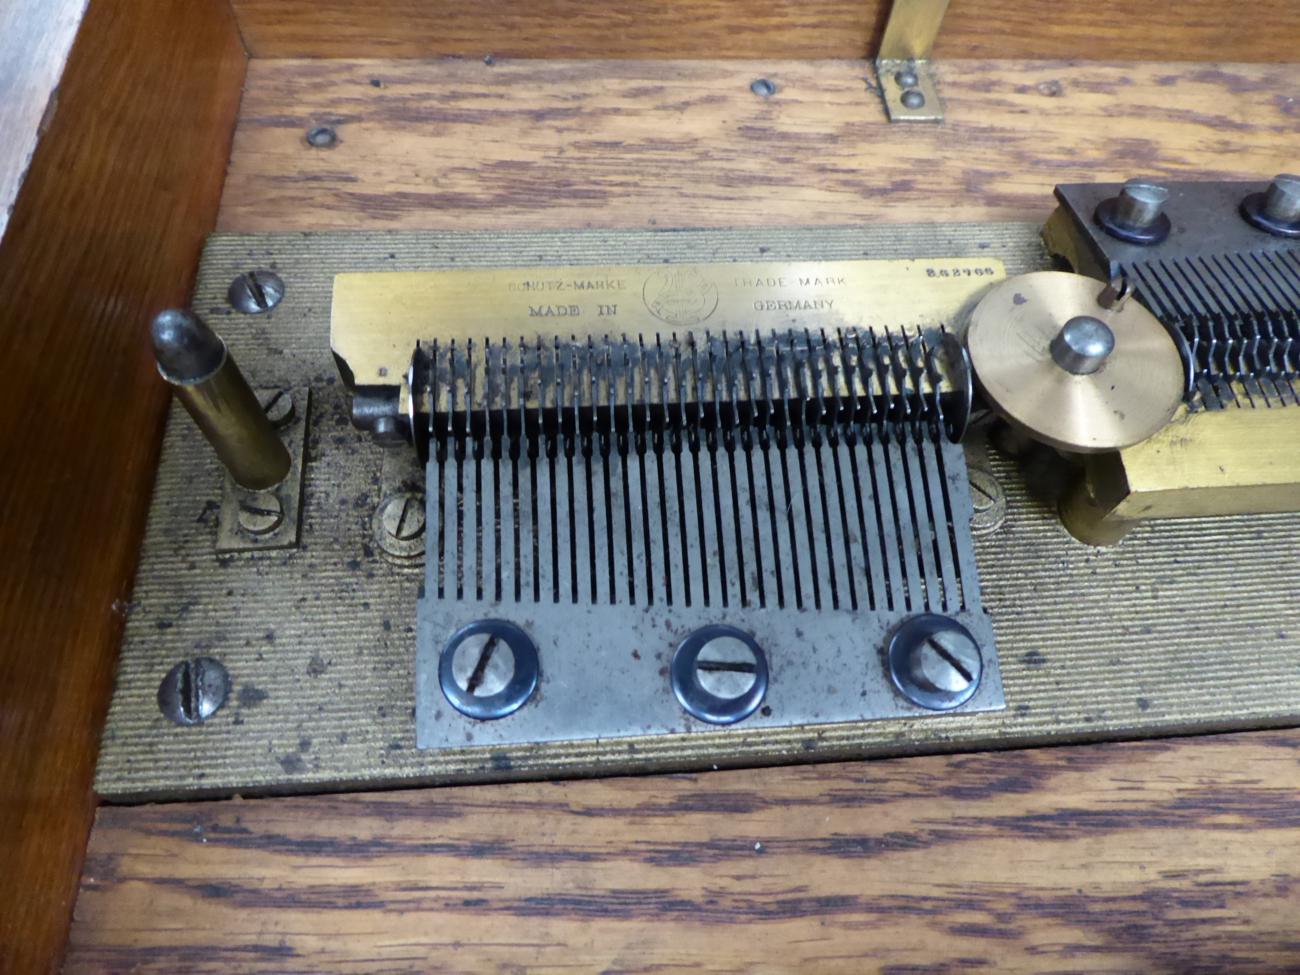 Symphonium Disc Music Box playing 8 1/4'' discs, with twin combs 'Schutz-Marke' numbered 262766, - Image 6 of 6